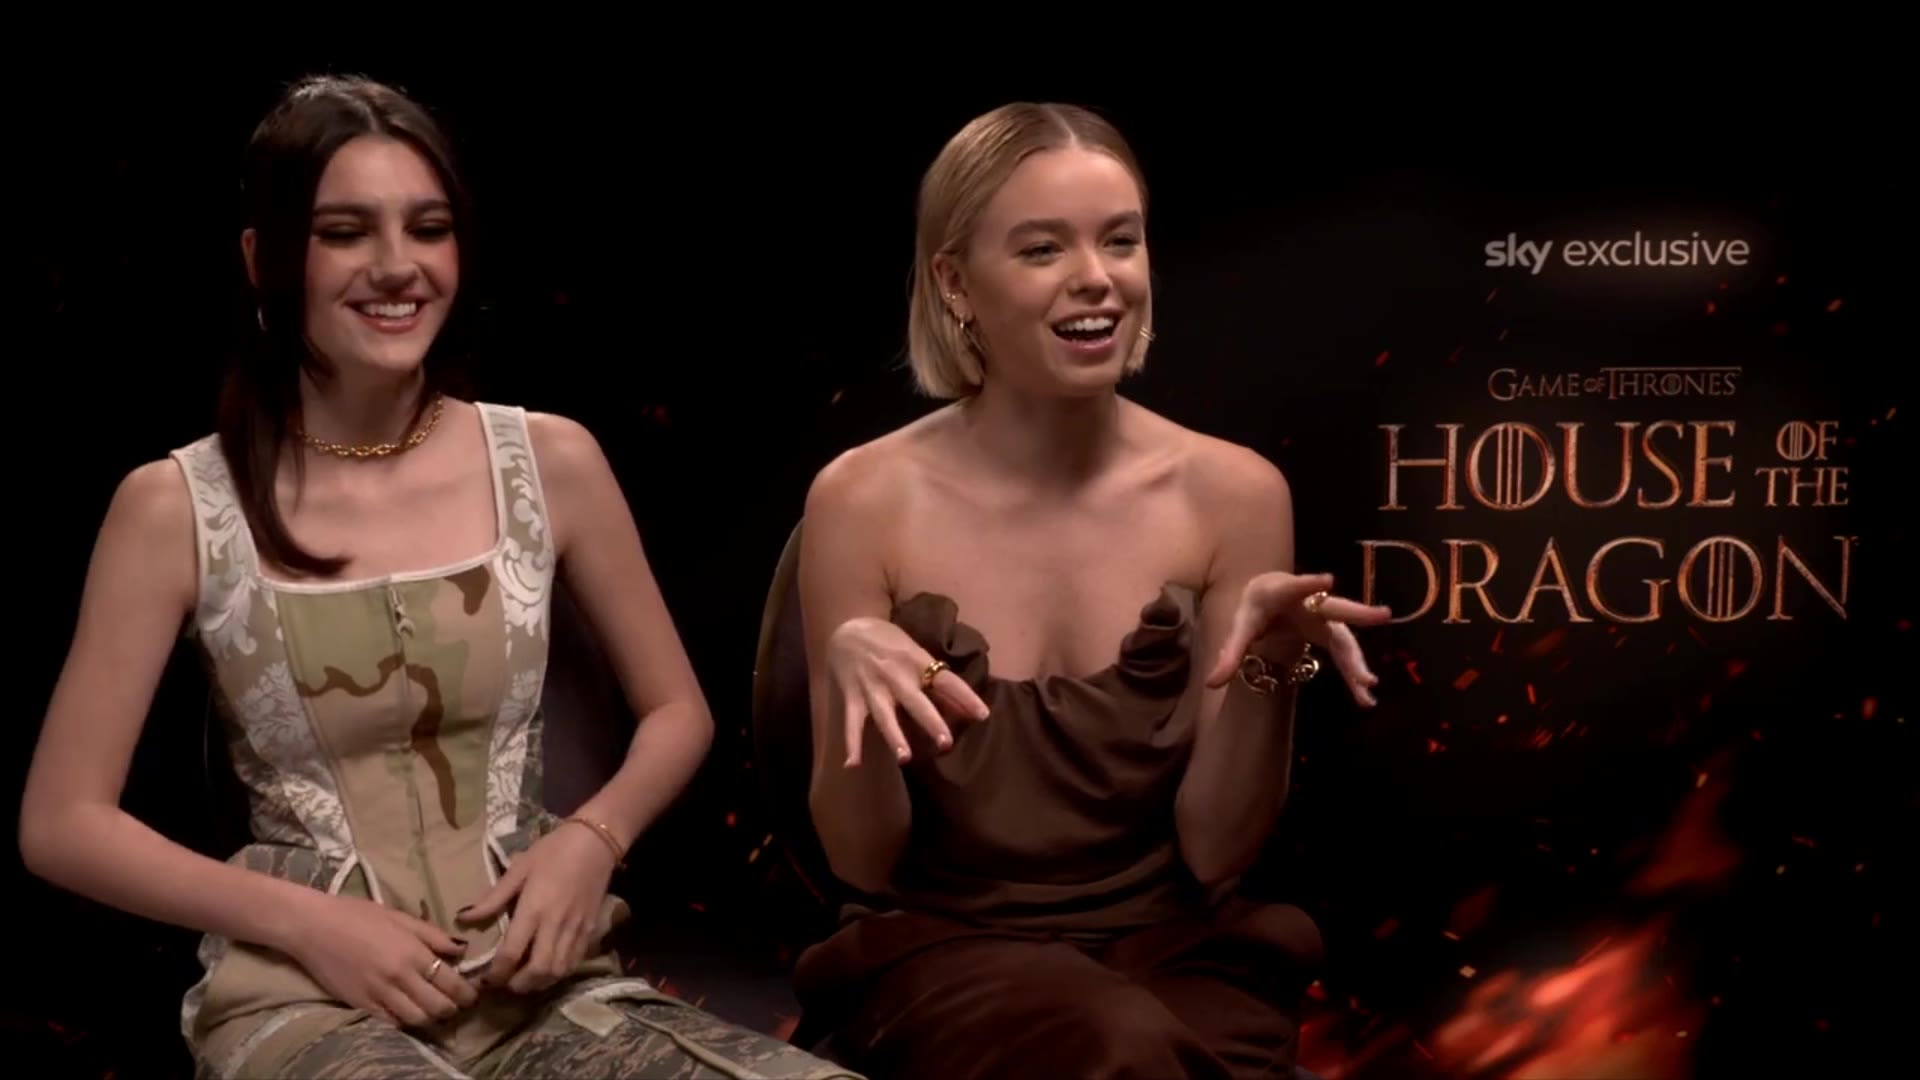 House of the Dragon cast: Who's in and Who's out on House of the